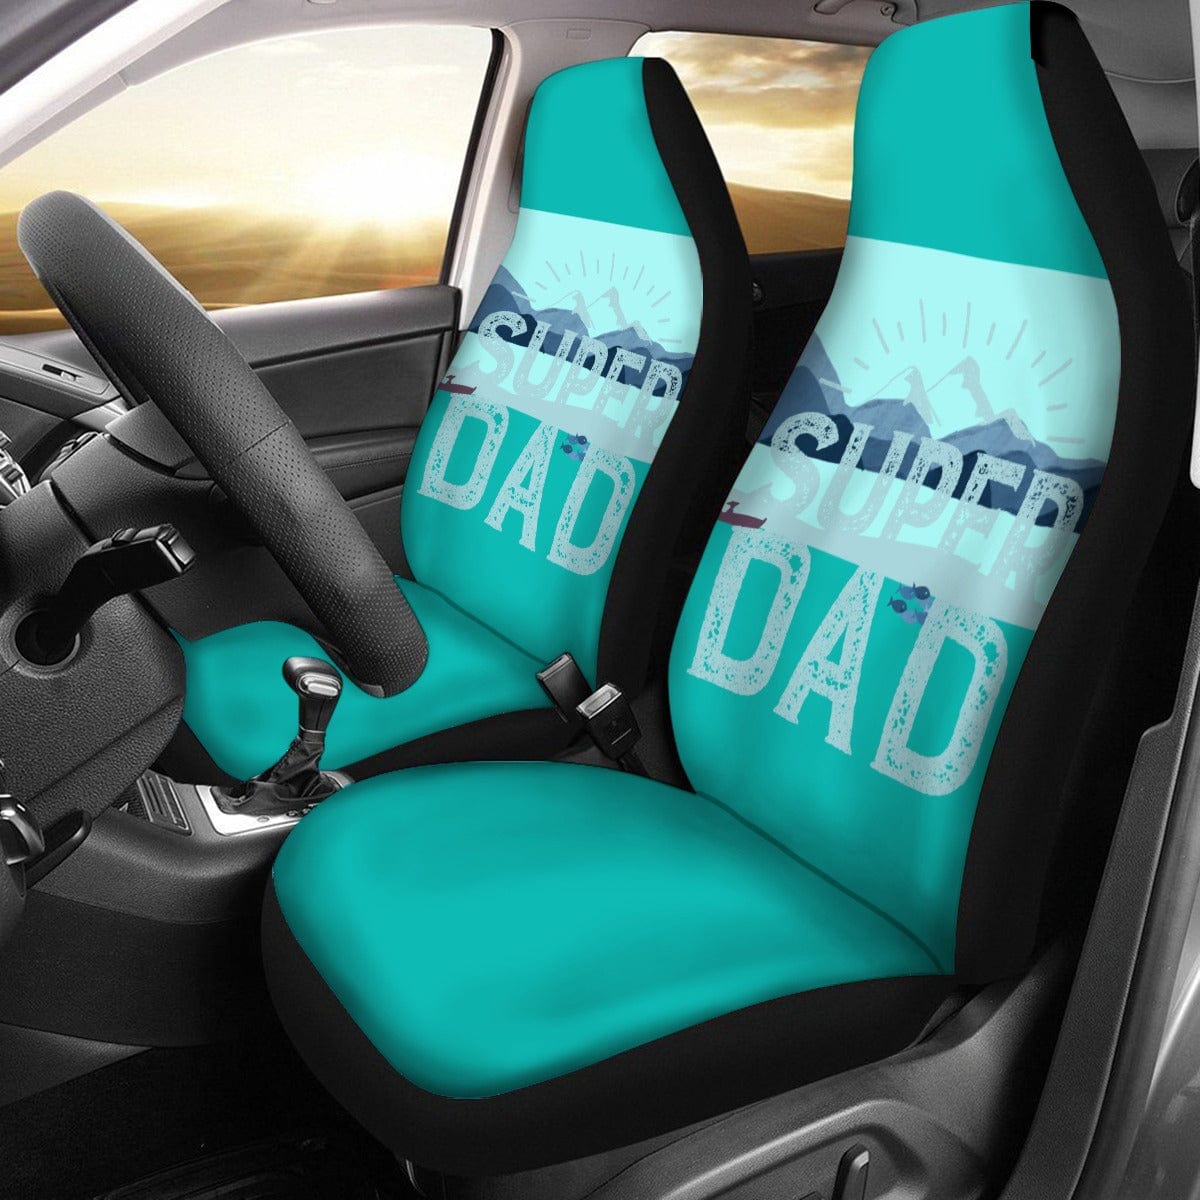 Yoycol U / White Super Dad - Gifts for Dad - Universal Car Seat Cover With Thickened Back